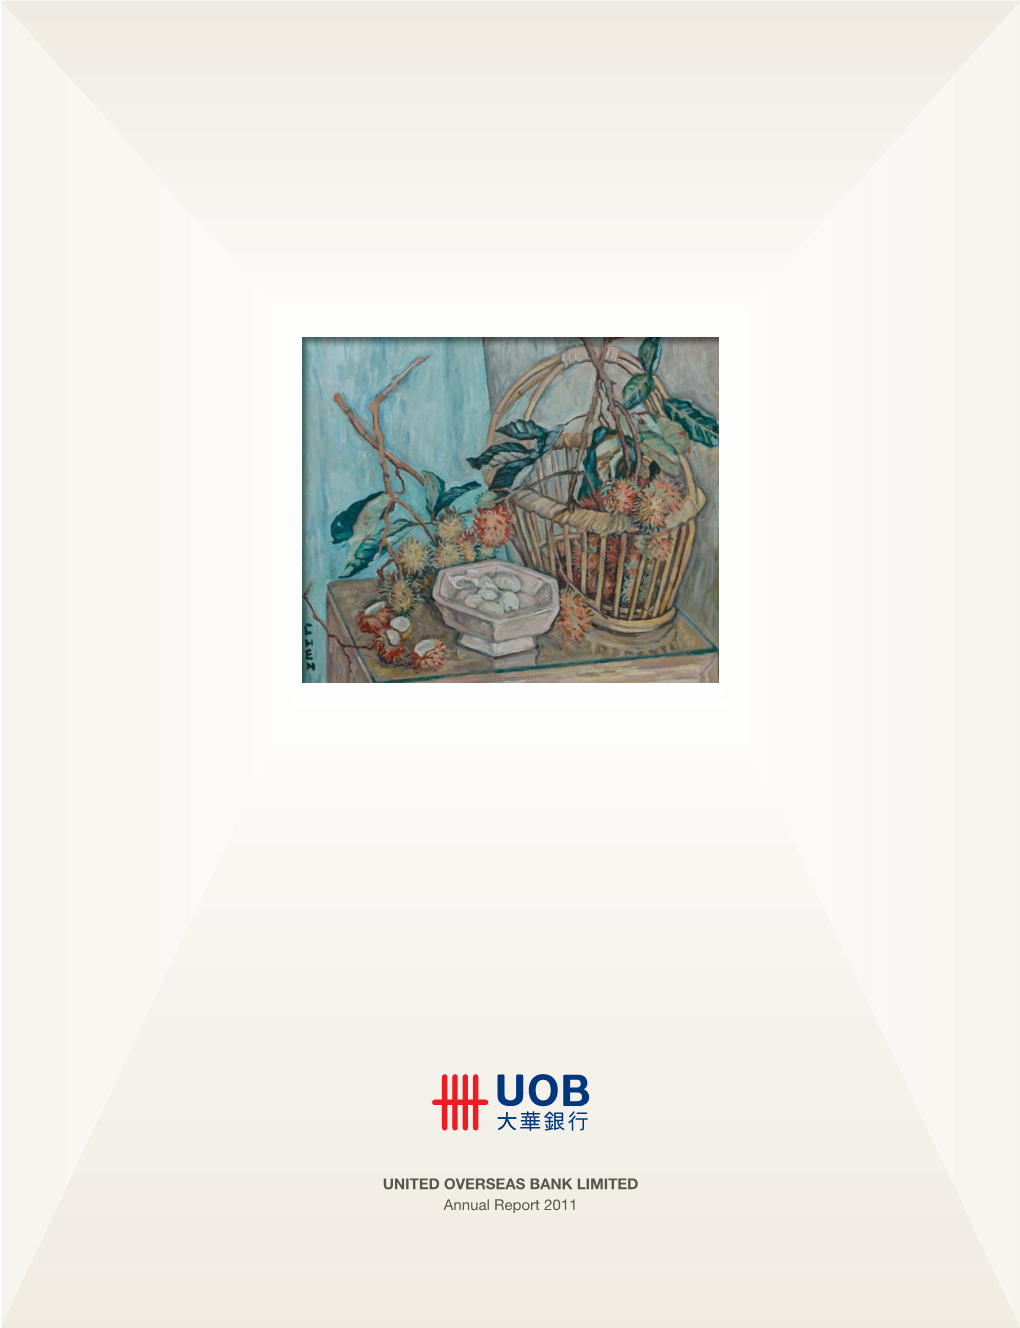 UNITED OVERSEAS BANK LIMITED Annual Report 2011